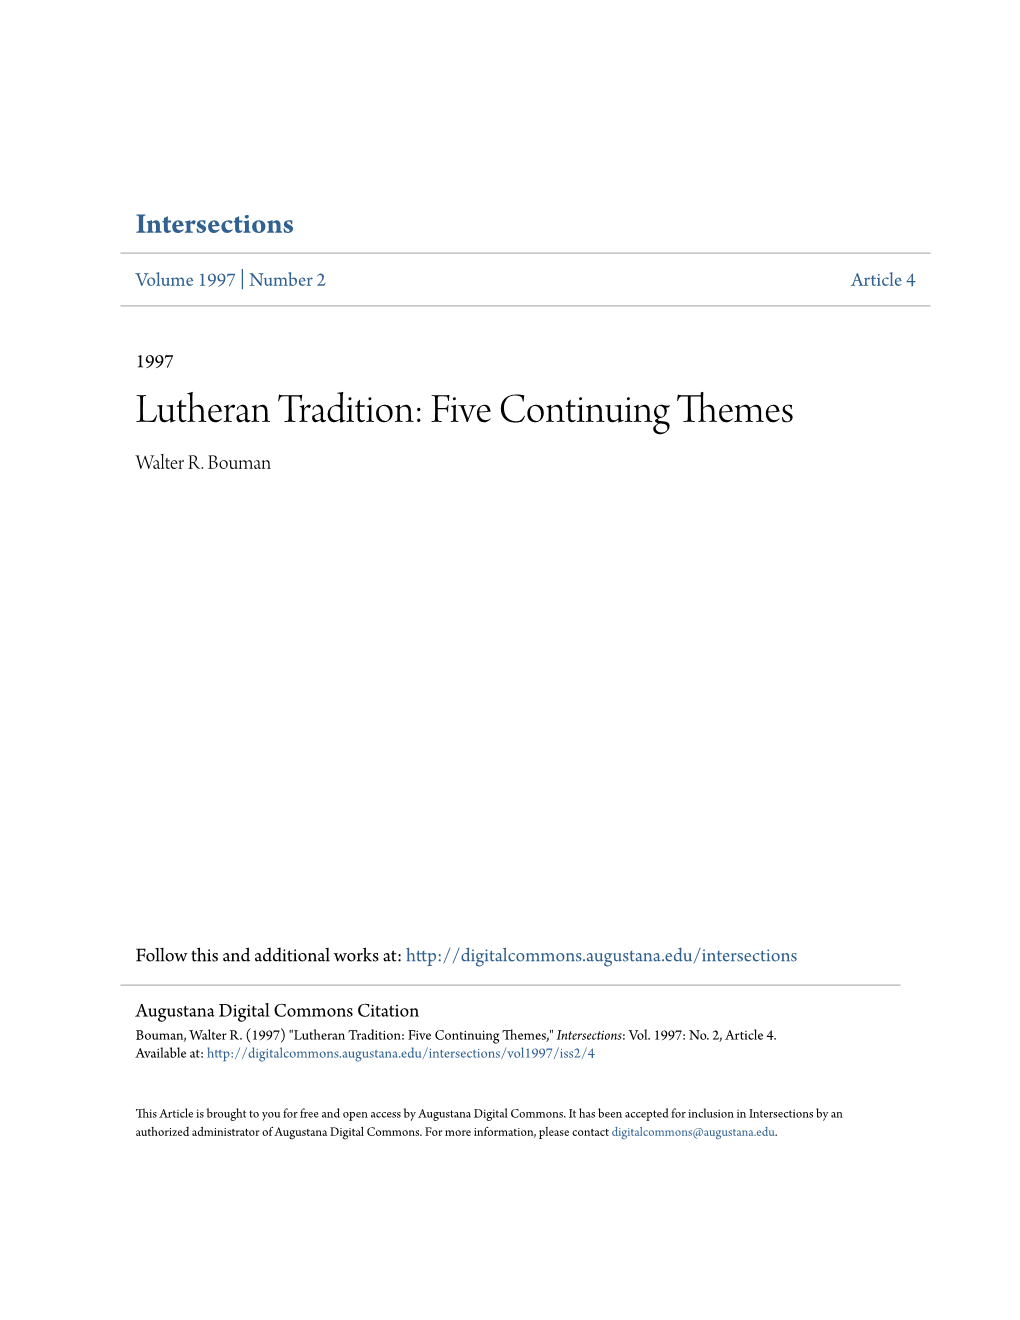 Lutheran Tradition: Five Continuing Themes Walter R